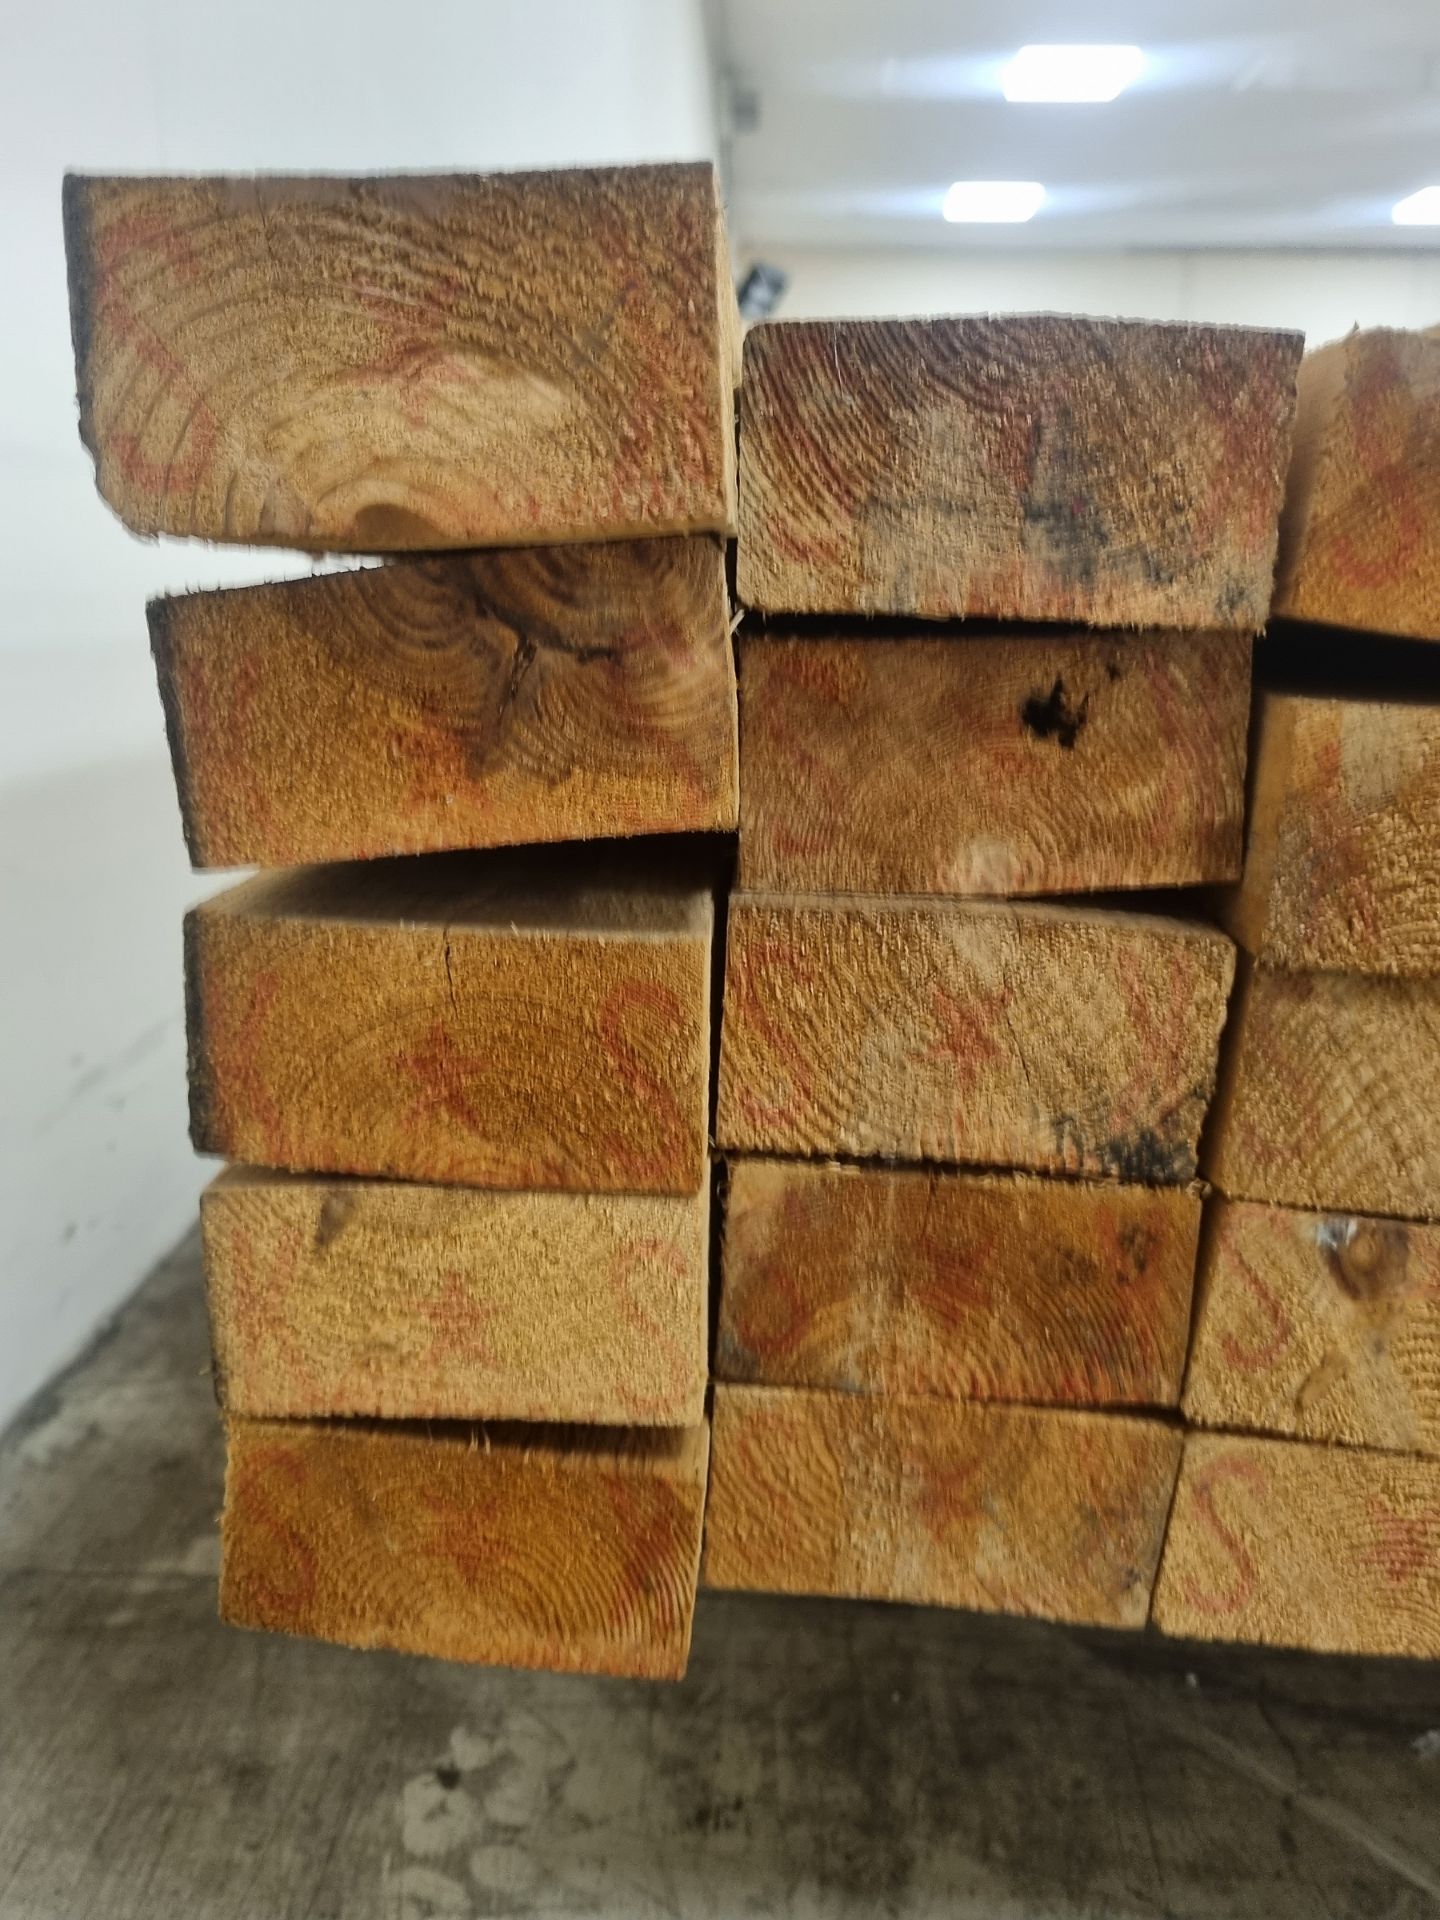 Pallet of 4"x2" (10x5cm) softwood, heat treated and debarked (GBFC-0452 DBHT) - L450cm - 65 pieces - Image 5 of 5